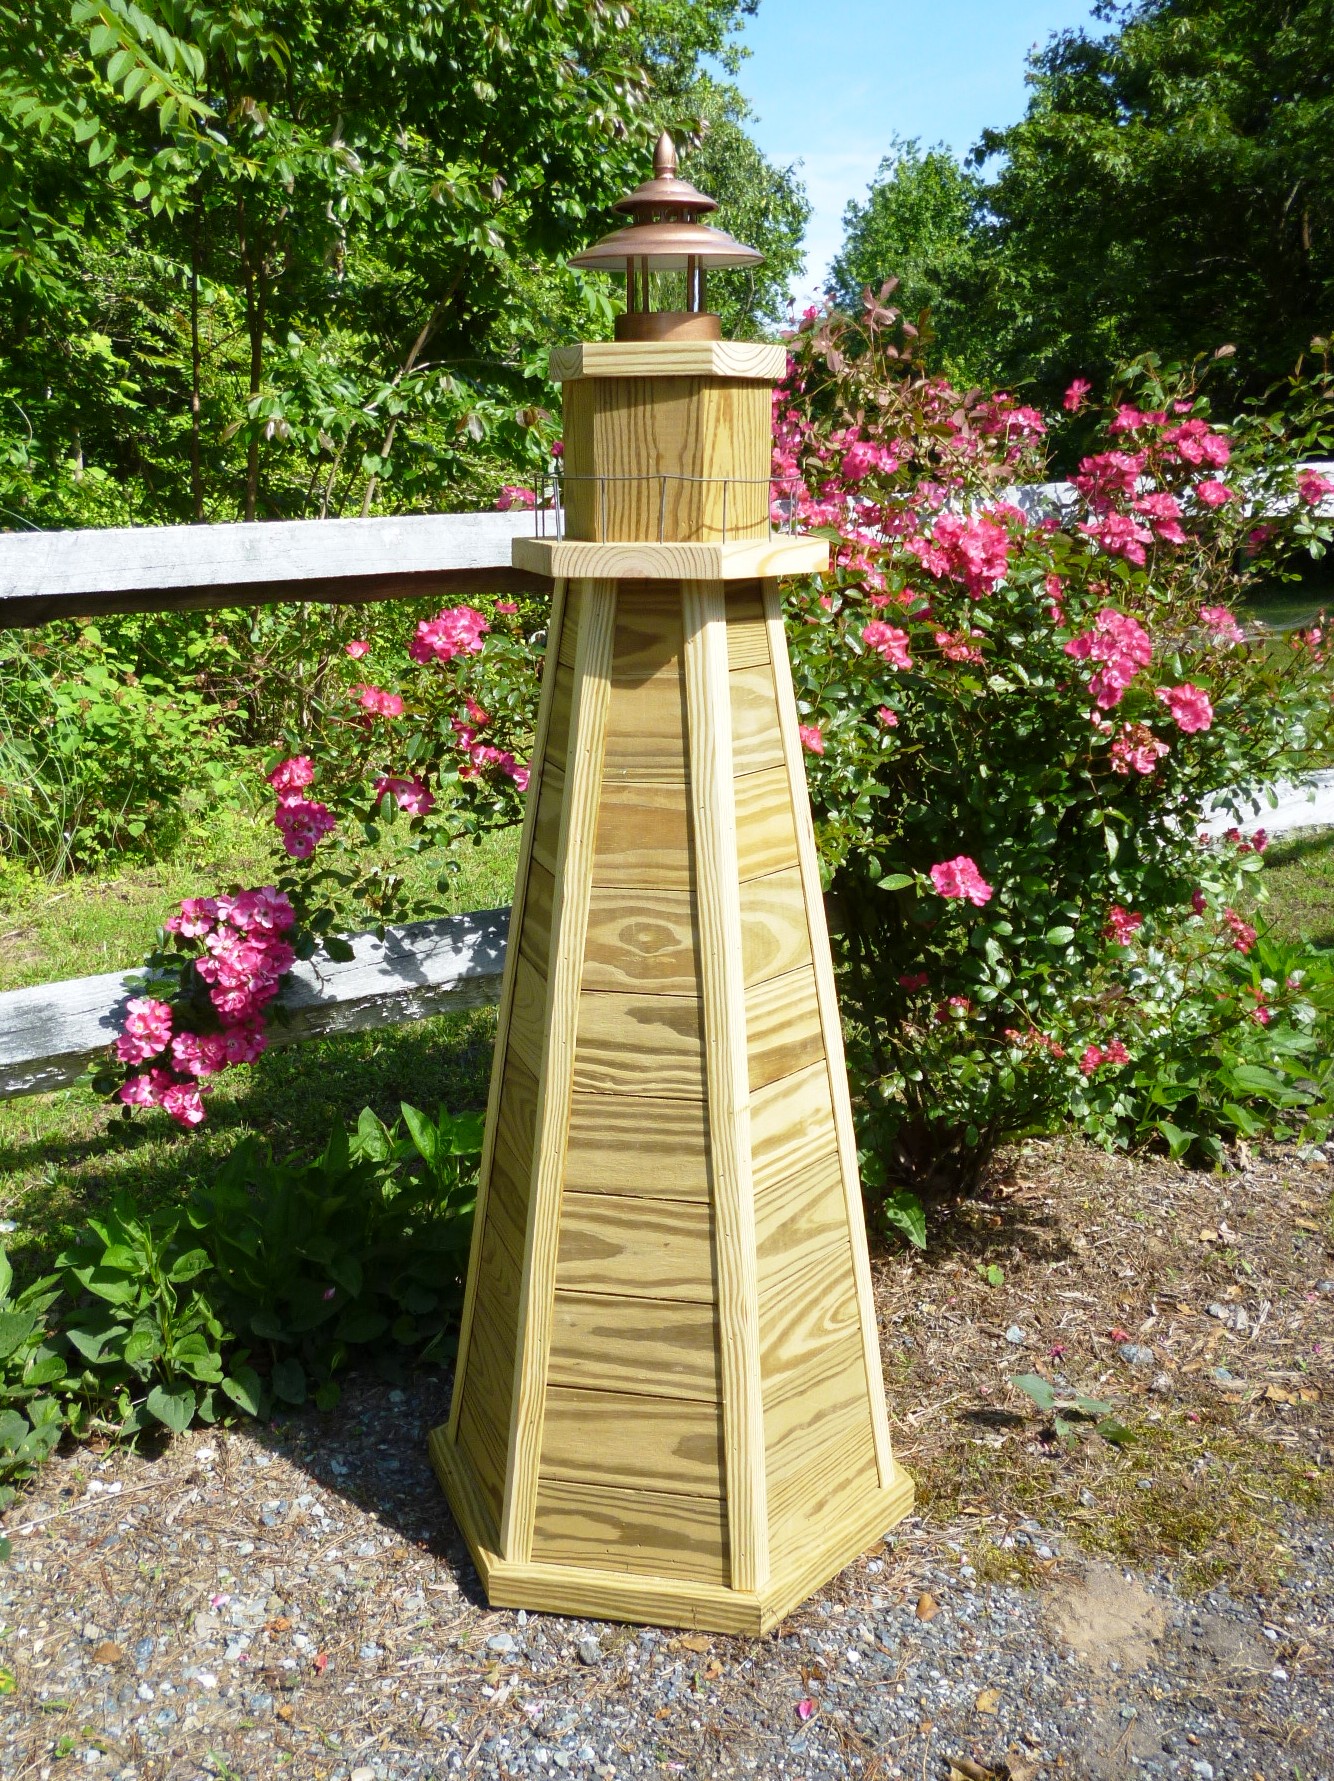 COMPLETE WOODWORKING PLANS TO BUILD THIS 4 FT. LAWN LIGHTHOUSE - WITH 